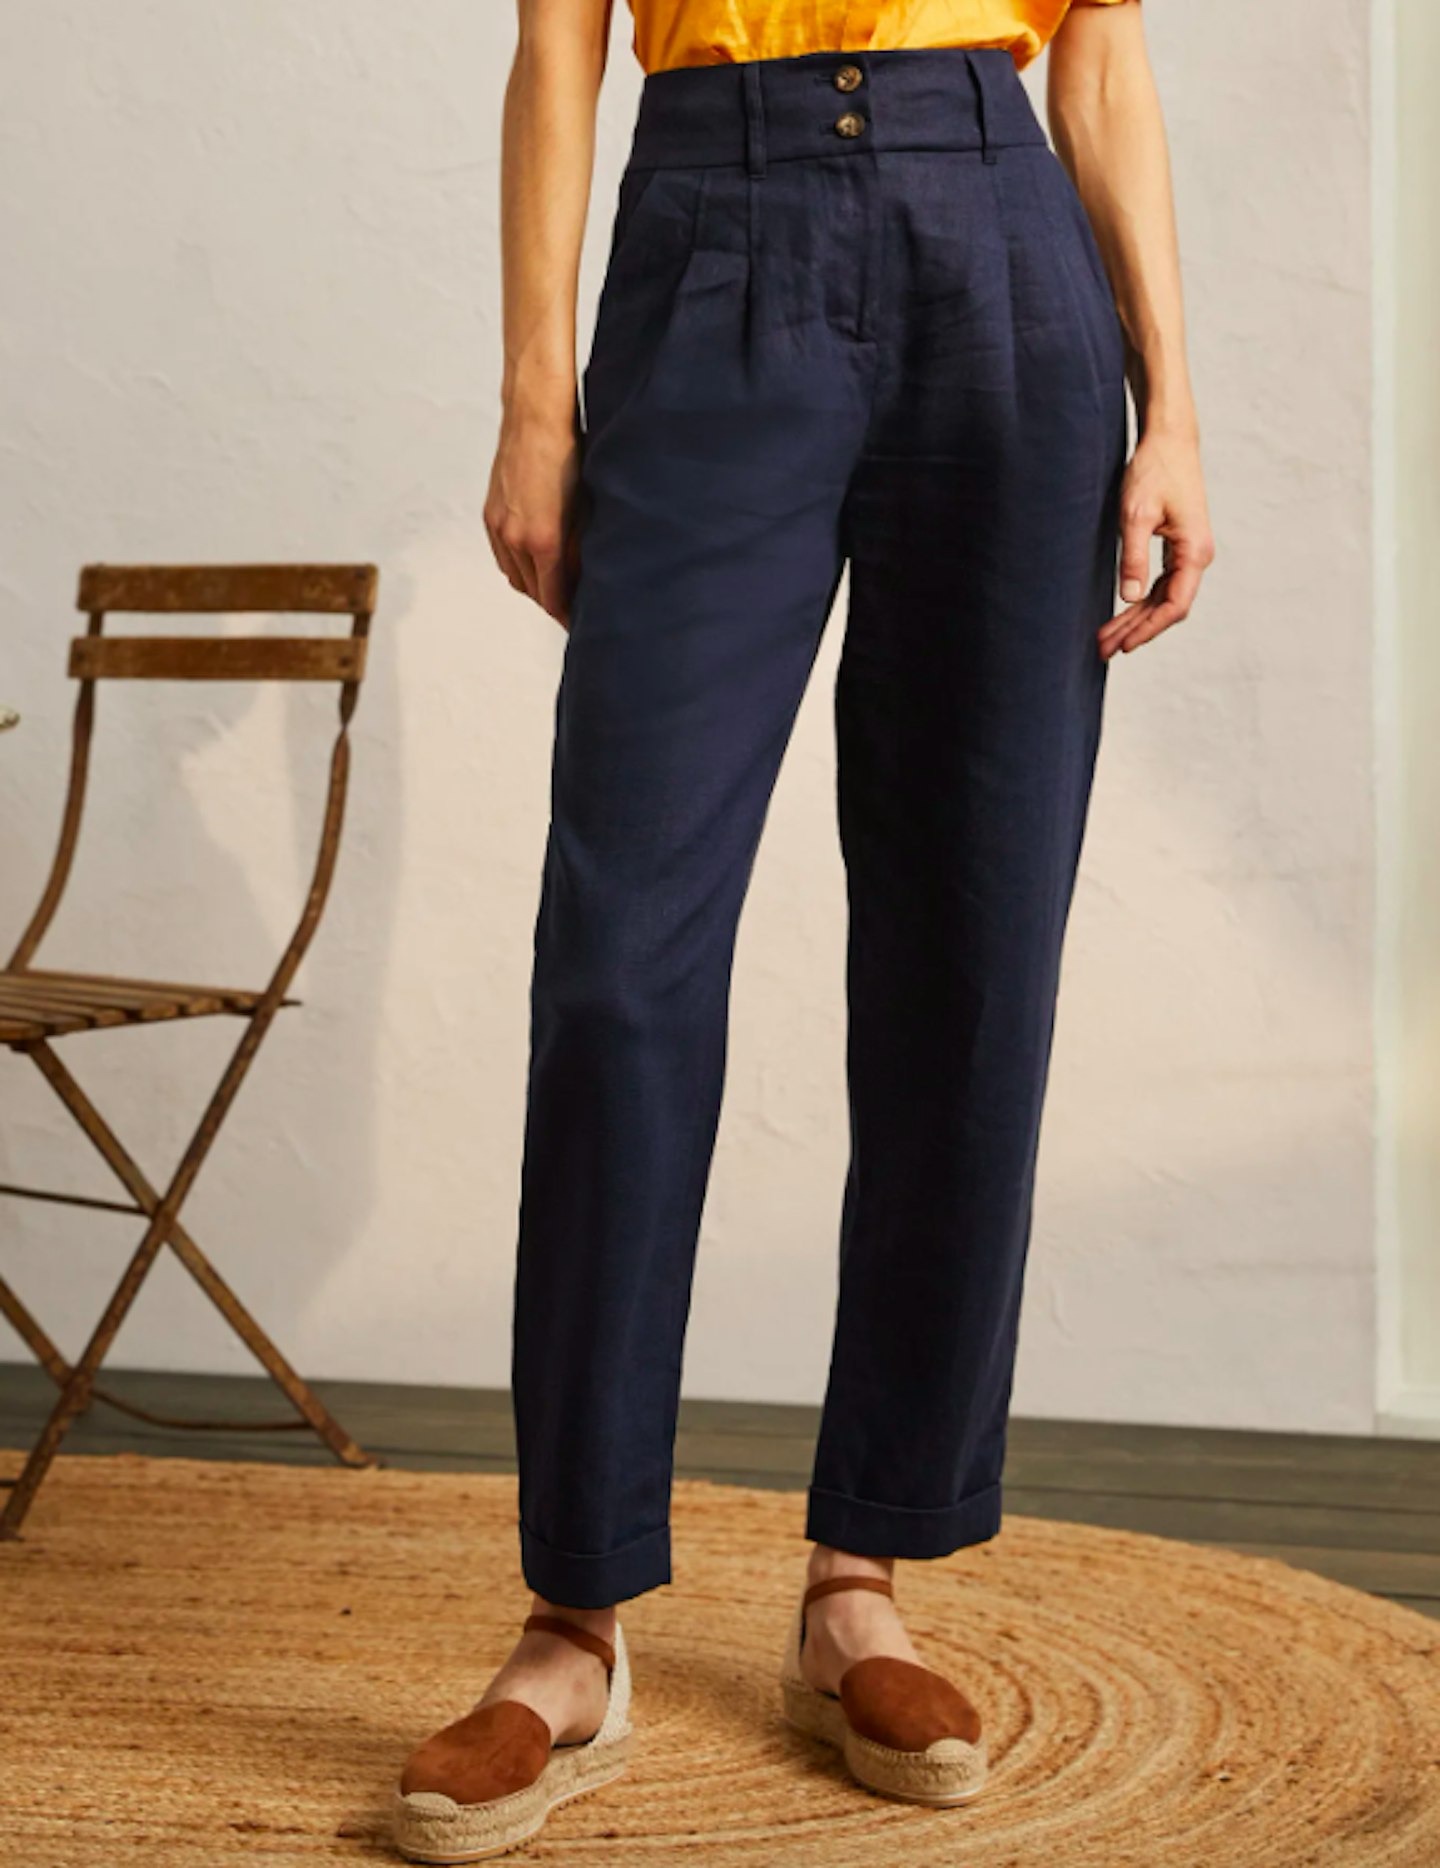 Boden, Turn-Up Linen Trousers, £59.50